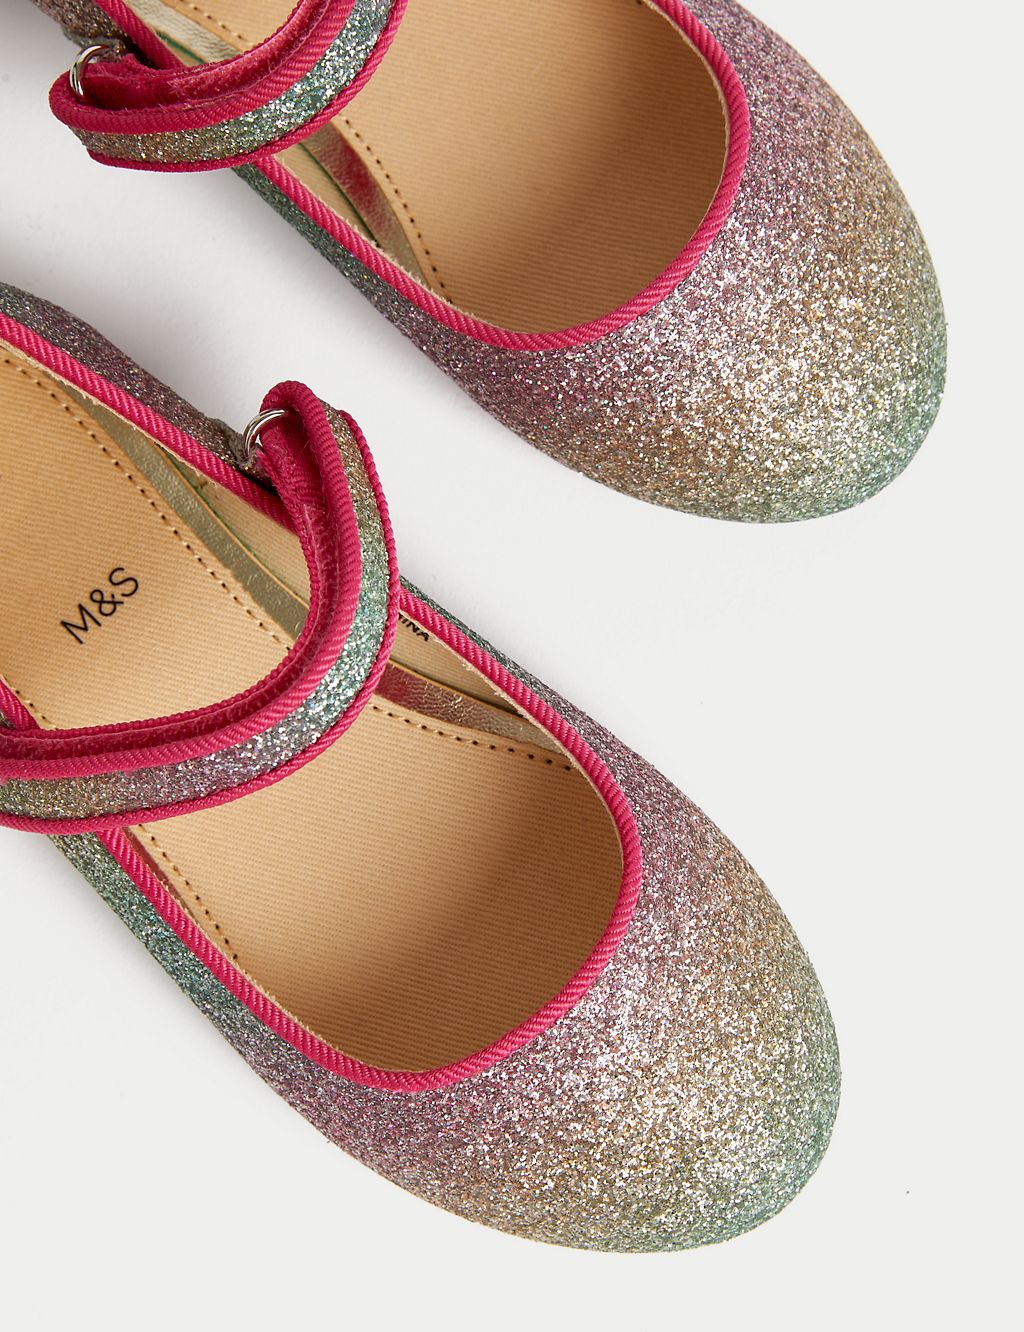 Kids' Glitter Mary Jane Shoes (4 Small - 2 Large) 2 of 4